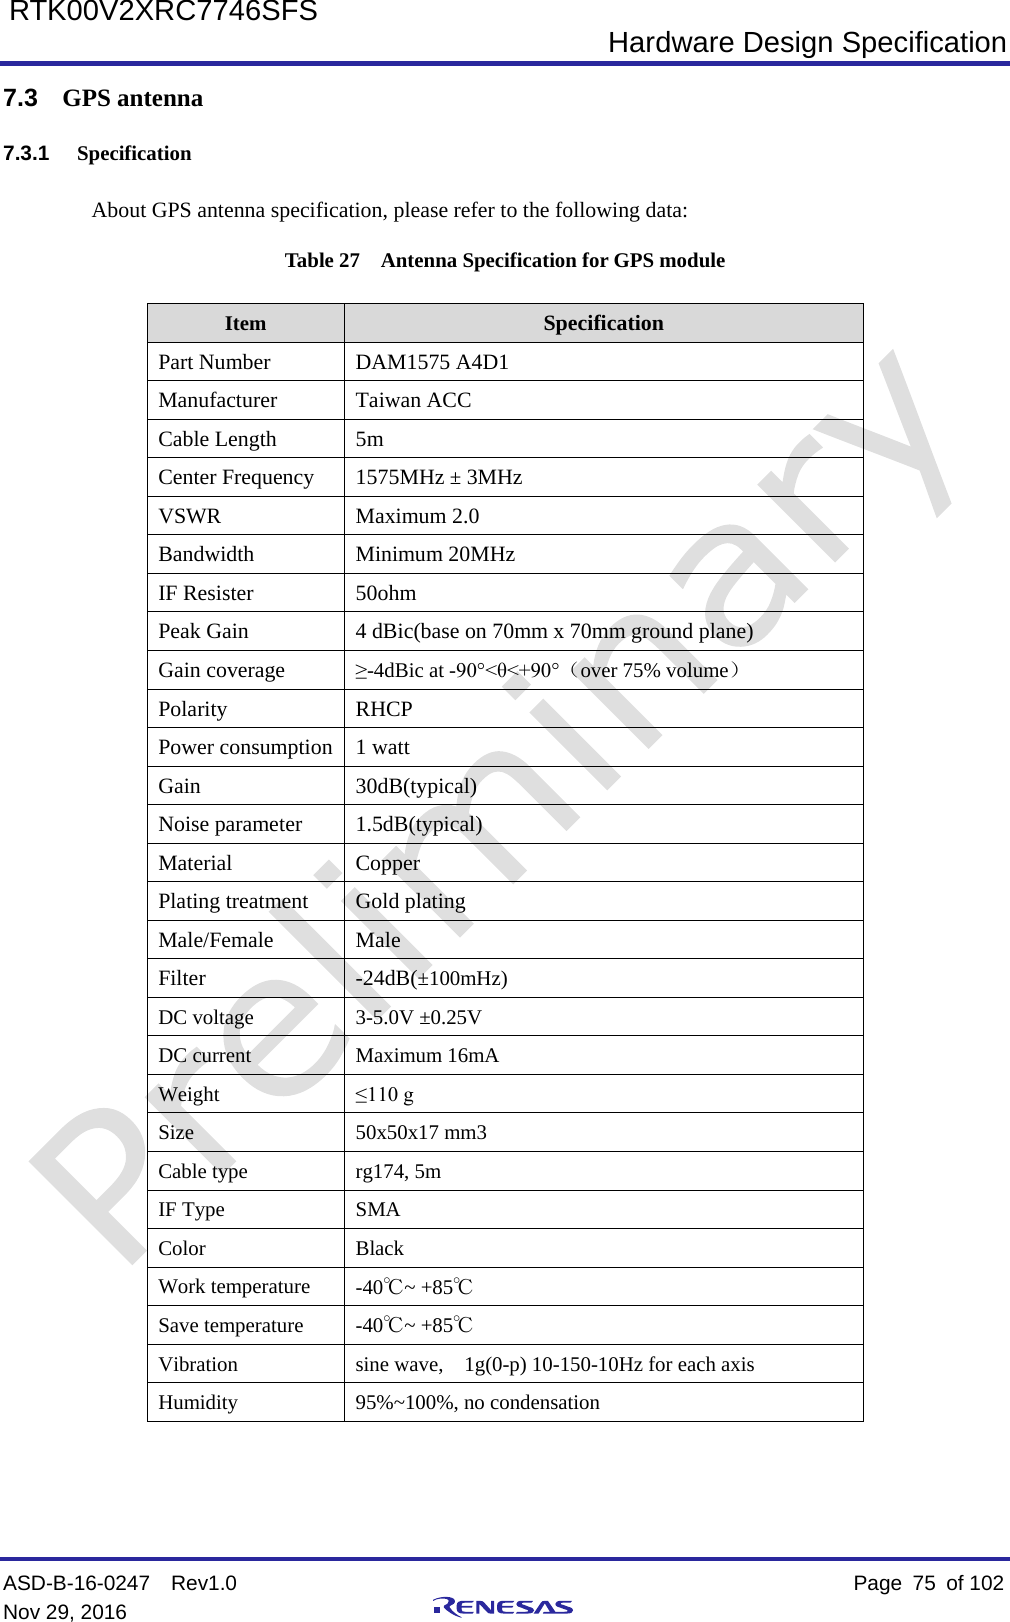  Hardware Design Specification ASD-B-16-0247  Rev1.0    Page  75 of 102 Nov 29, 2016     RTK00V2XRC7746SFS 7.3 GPS antenna 7.3.1 Specification About GPS antenna specification, please refer to the following data: Table 27  Antenna Specification for GPS module Item Specification Part Number DAM1575 A4D1 Manufacturer Taiwan ACC Cable Length 5m Center Frequency 1575MHz ± 3MHz VSWR Maximum 2.0 Bandwidth Minimum 20MHz IF Resister 50ohm Peak Gain 4 dBic(base on 70mm x 70mm ground plane) Gain coverage ≥-4dBic at -90°&lt;θ&lt;+90°（over 75% volume） Polarity RHCP Power consumption 1 watt Gain 30dB(typical) Noise parameter 1.5dB(typical) Material  Copper Plating treatment Gold plating Male/Female Male Filter  -24dB(±100mHz) DC voltage 3-5.0V ±0.25V DC current Maximum 16mA Weight ≤110 g Size 50x50x17 mm3 Cable type rg174, 5m IF Type SMA Color Black Work temperature -40℃~ +85℃ Save temperature -40℃~ +85℃ Vibration sine wave,    1g(0-p) 10-150-10Hz for each axis Humidity 95%~100%, no condensation    